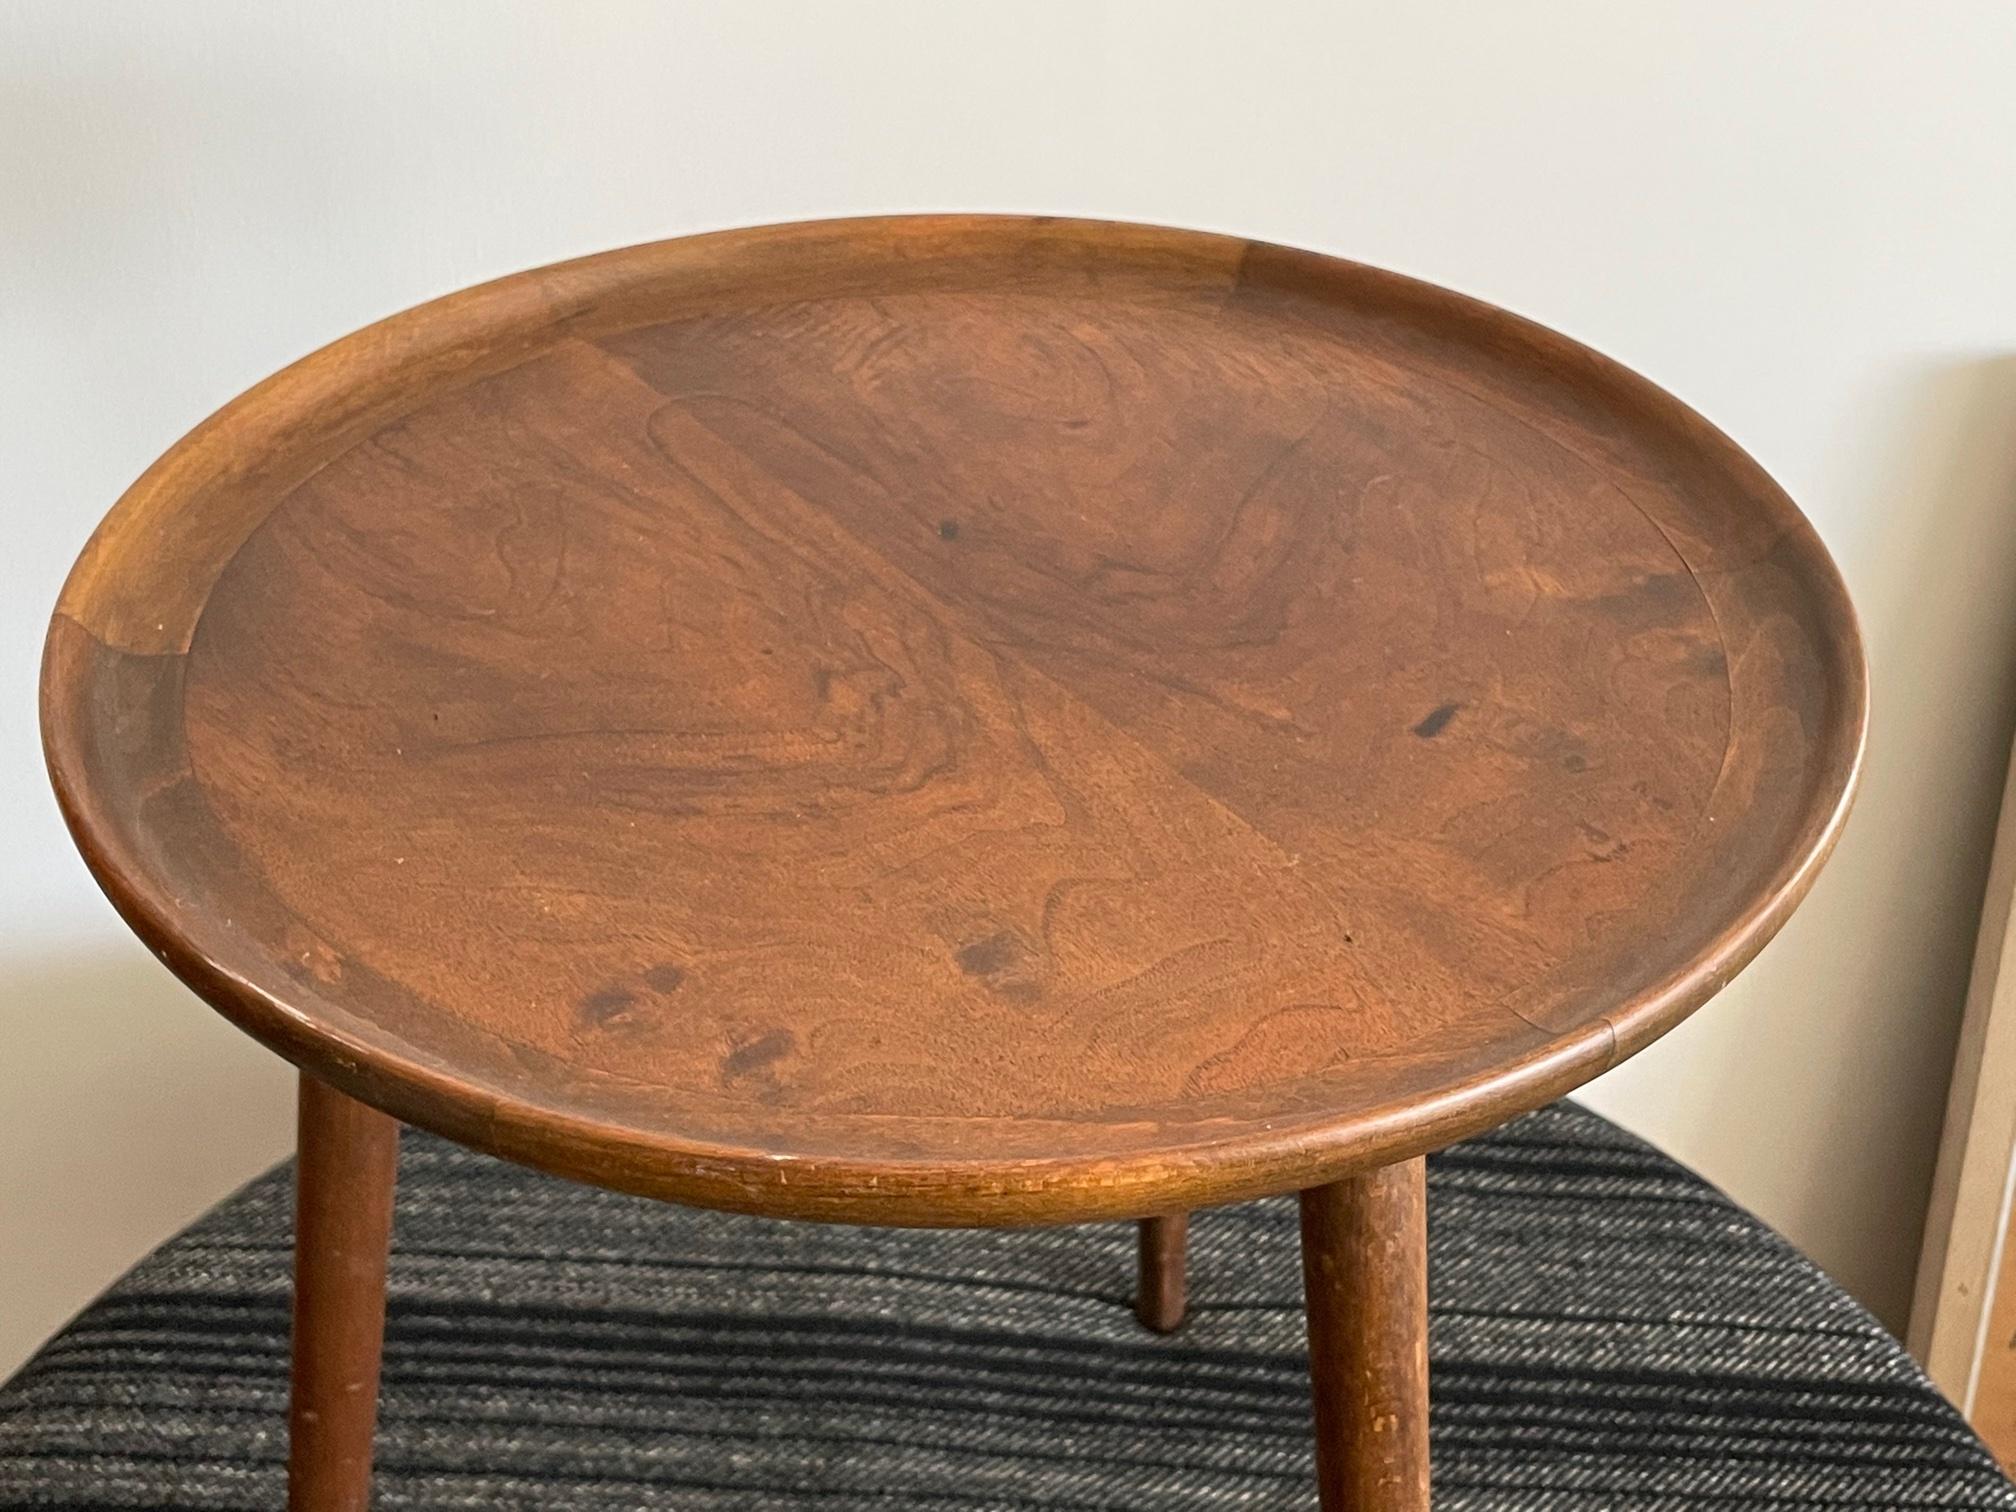 An unusual side table designed by Anton Kildeberg with a pie edge shaped top. Danish, ca' 1950's.